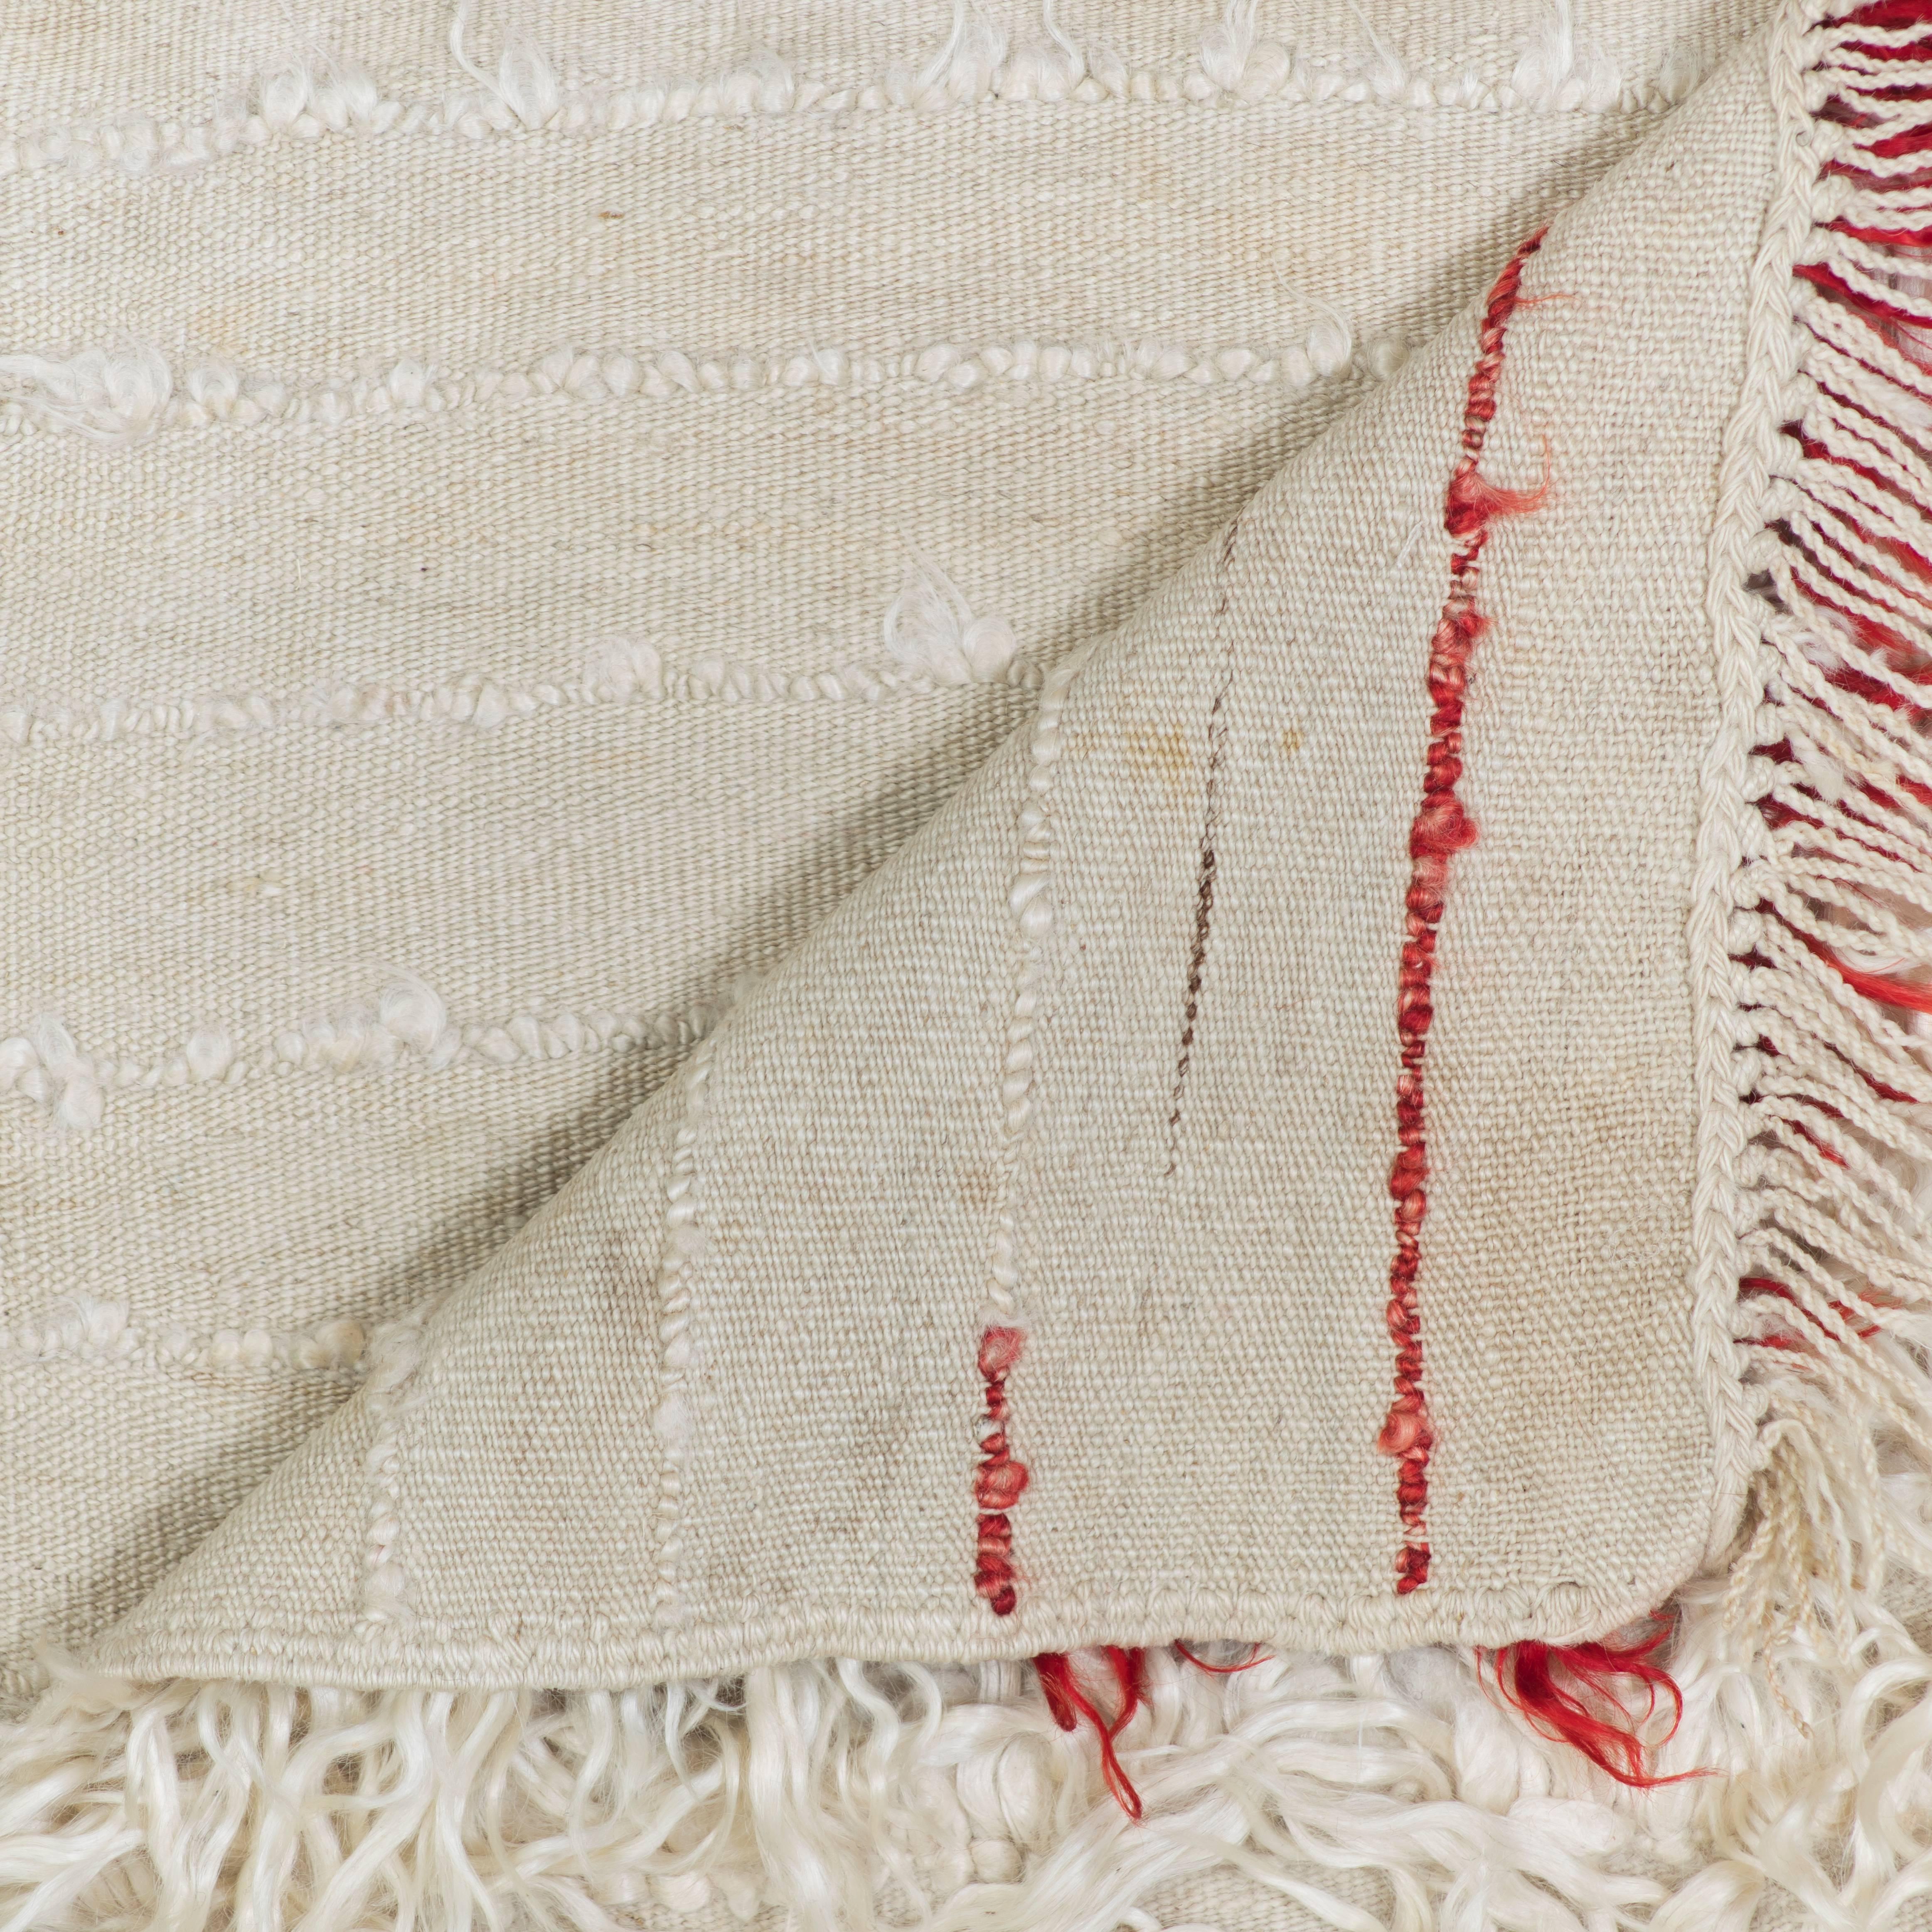 A Filikli's silky pile is handwoven from longhaired goat’s wool.

* This vintage rug has its own distinctions and imperfections. Minor wear, flaws and discolorations may be expected, consistent with the age and use of a vintage textile. All sales